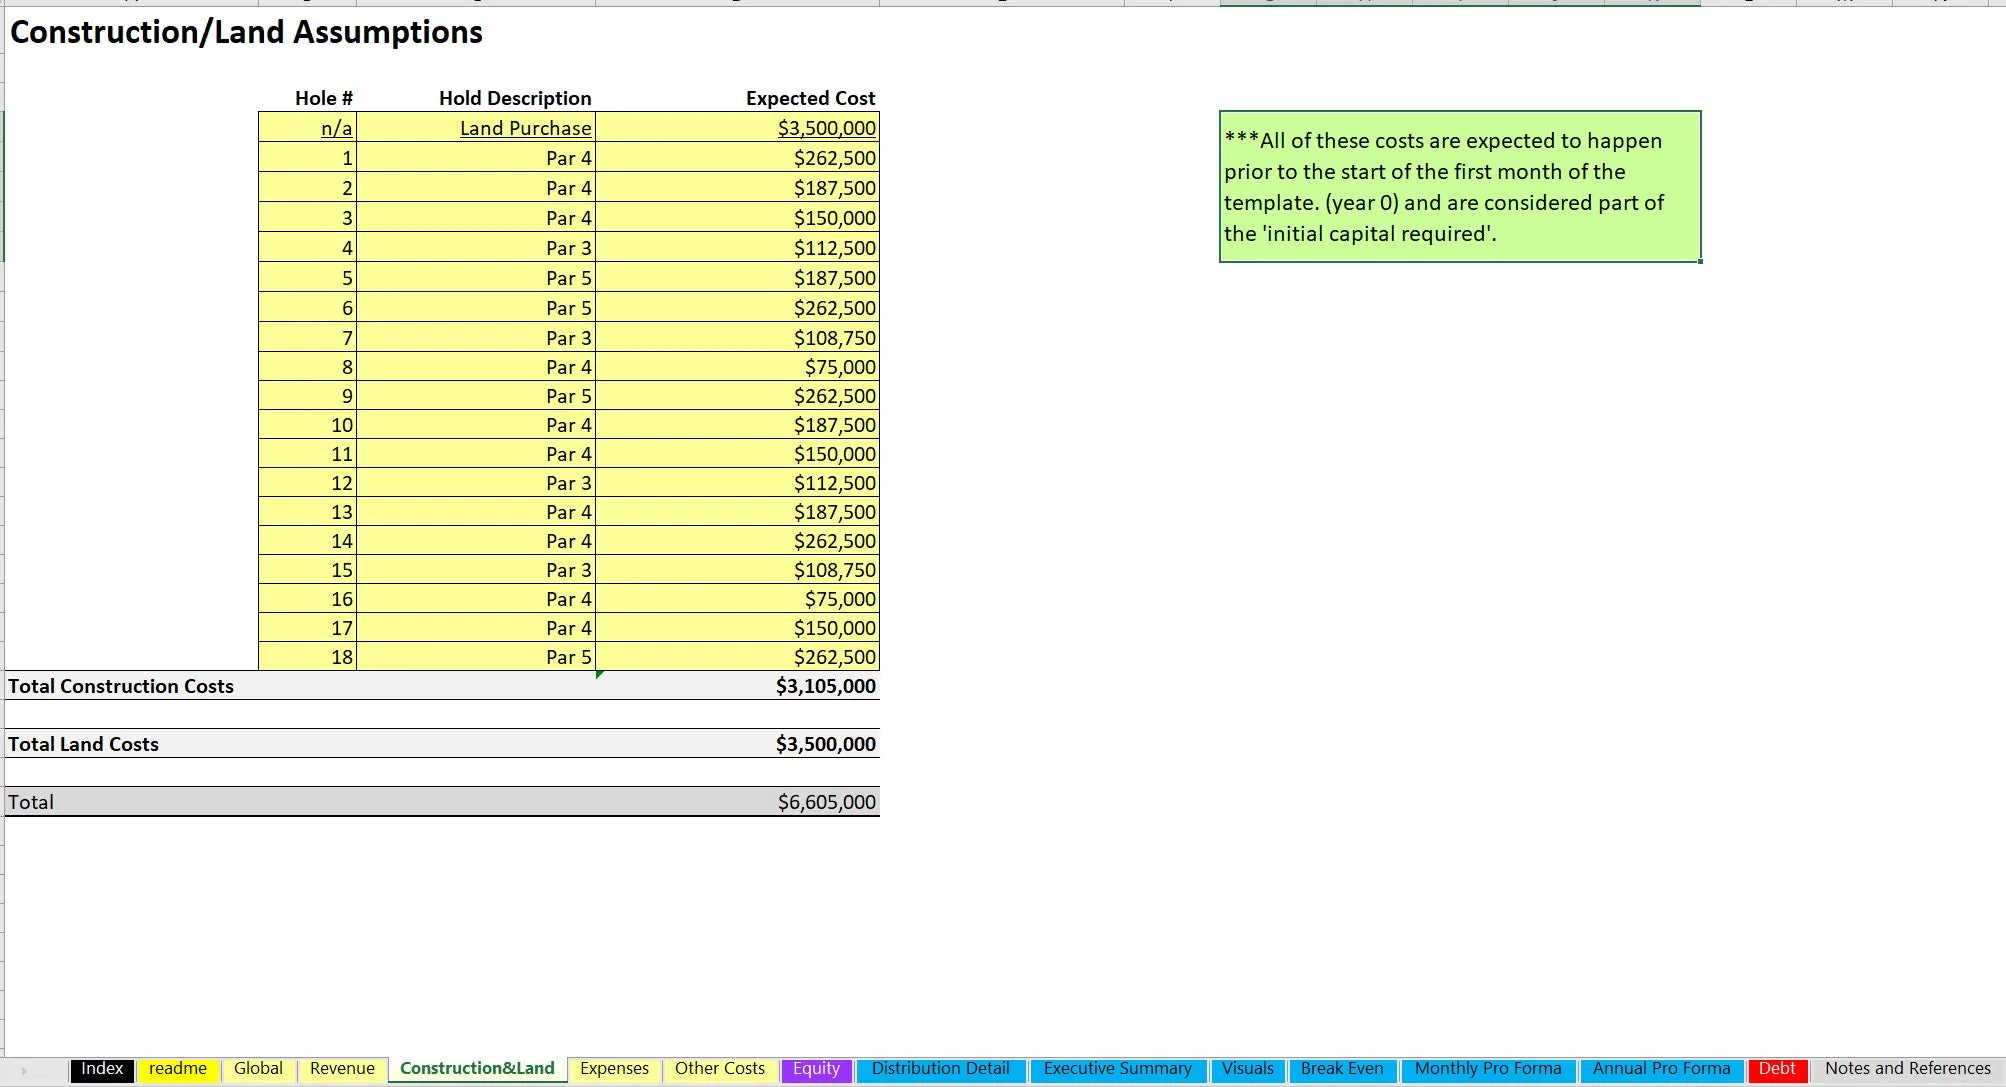 This is a partial preview of Golf Course Financial Model (Excel workbook (XLSX)). 